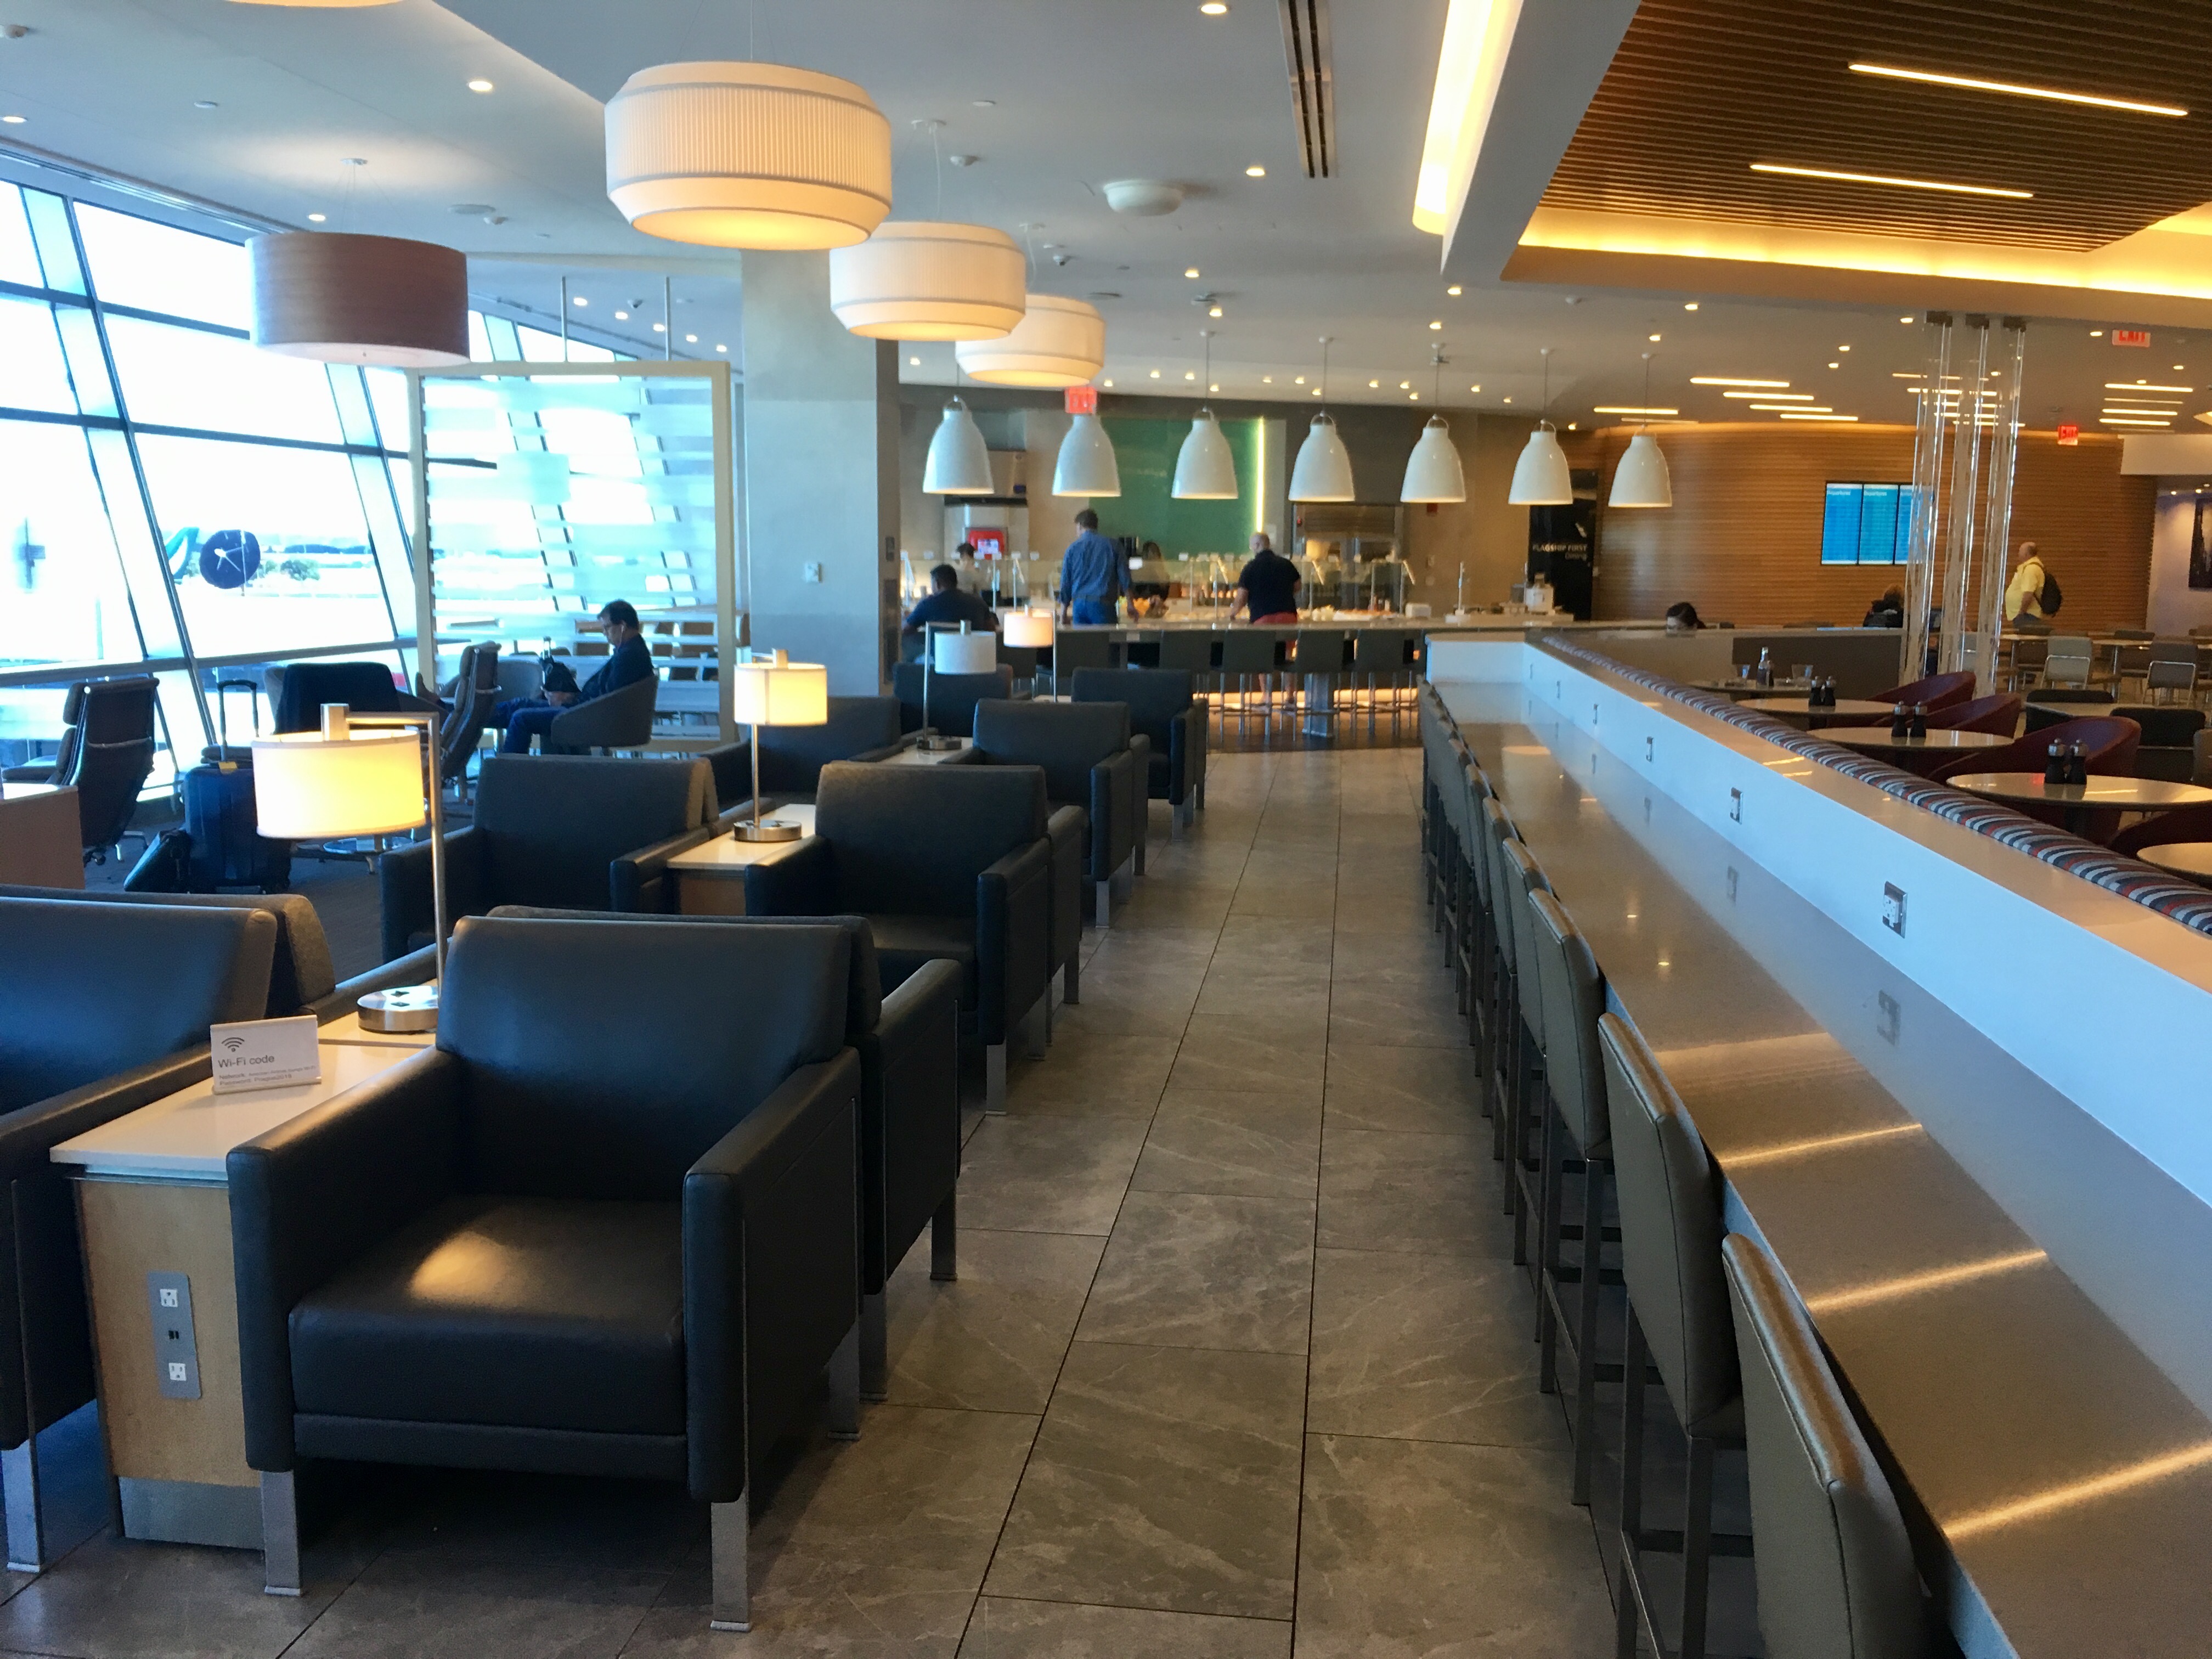 Review: AA Flagship Lounge JFK and JFK-LAX Transcontinental Business Class